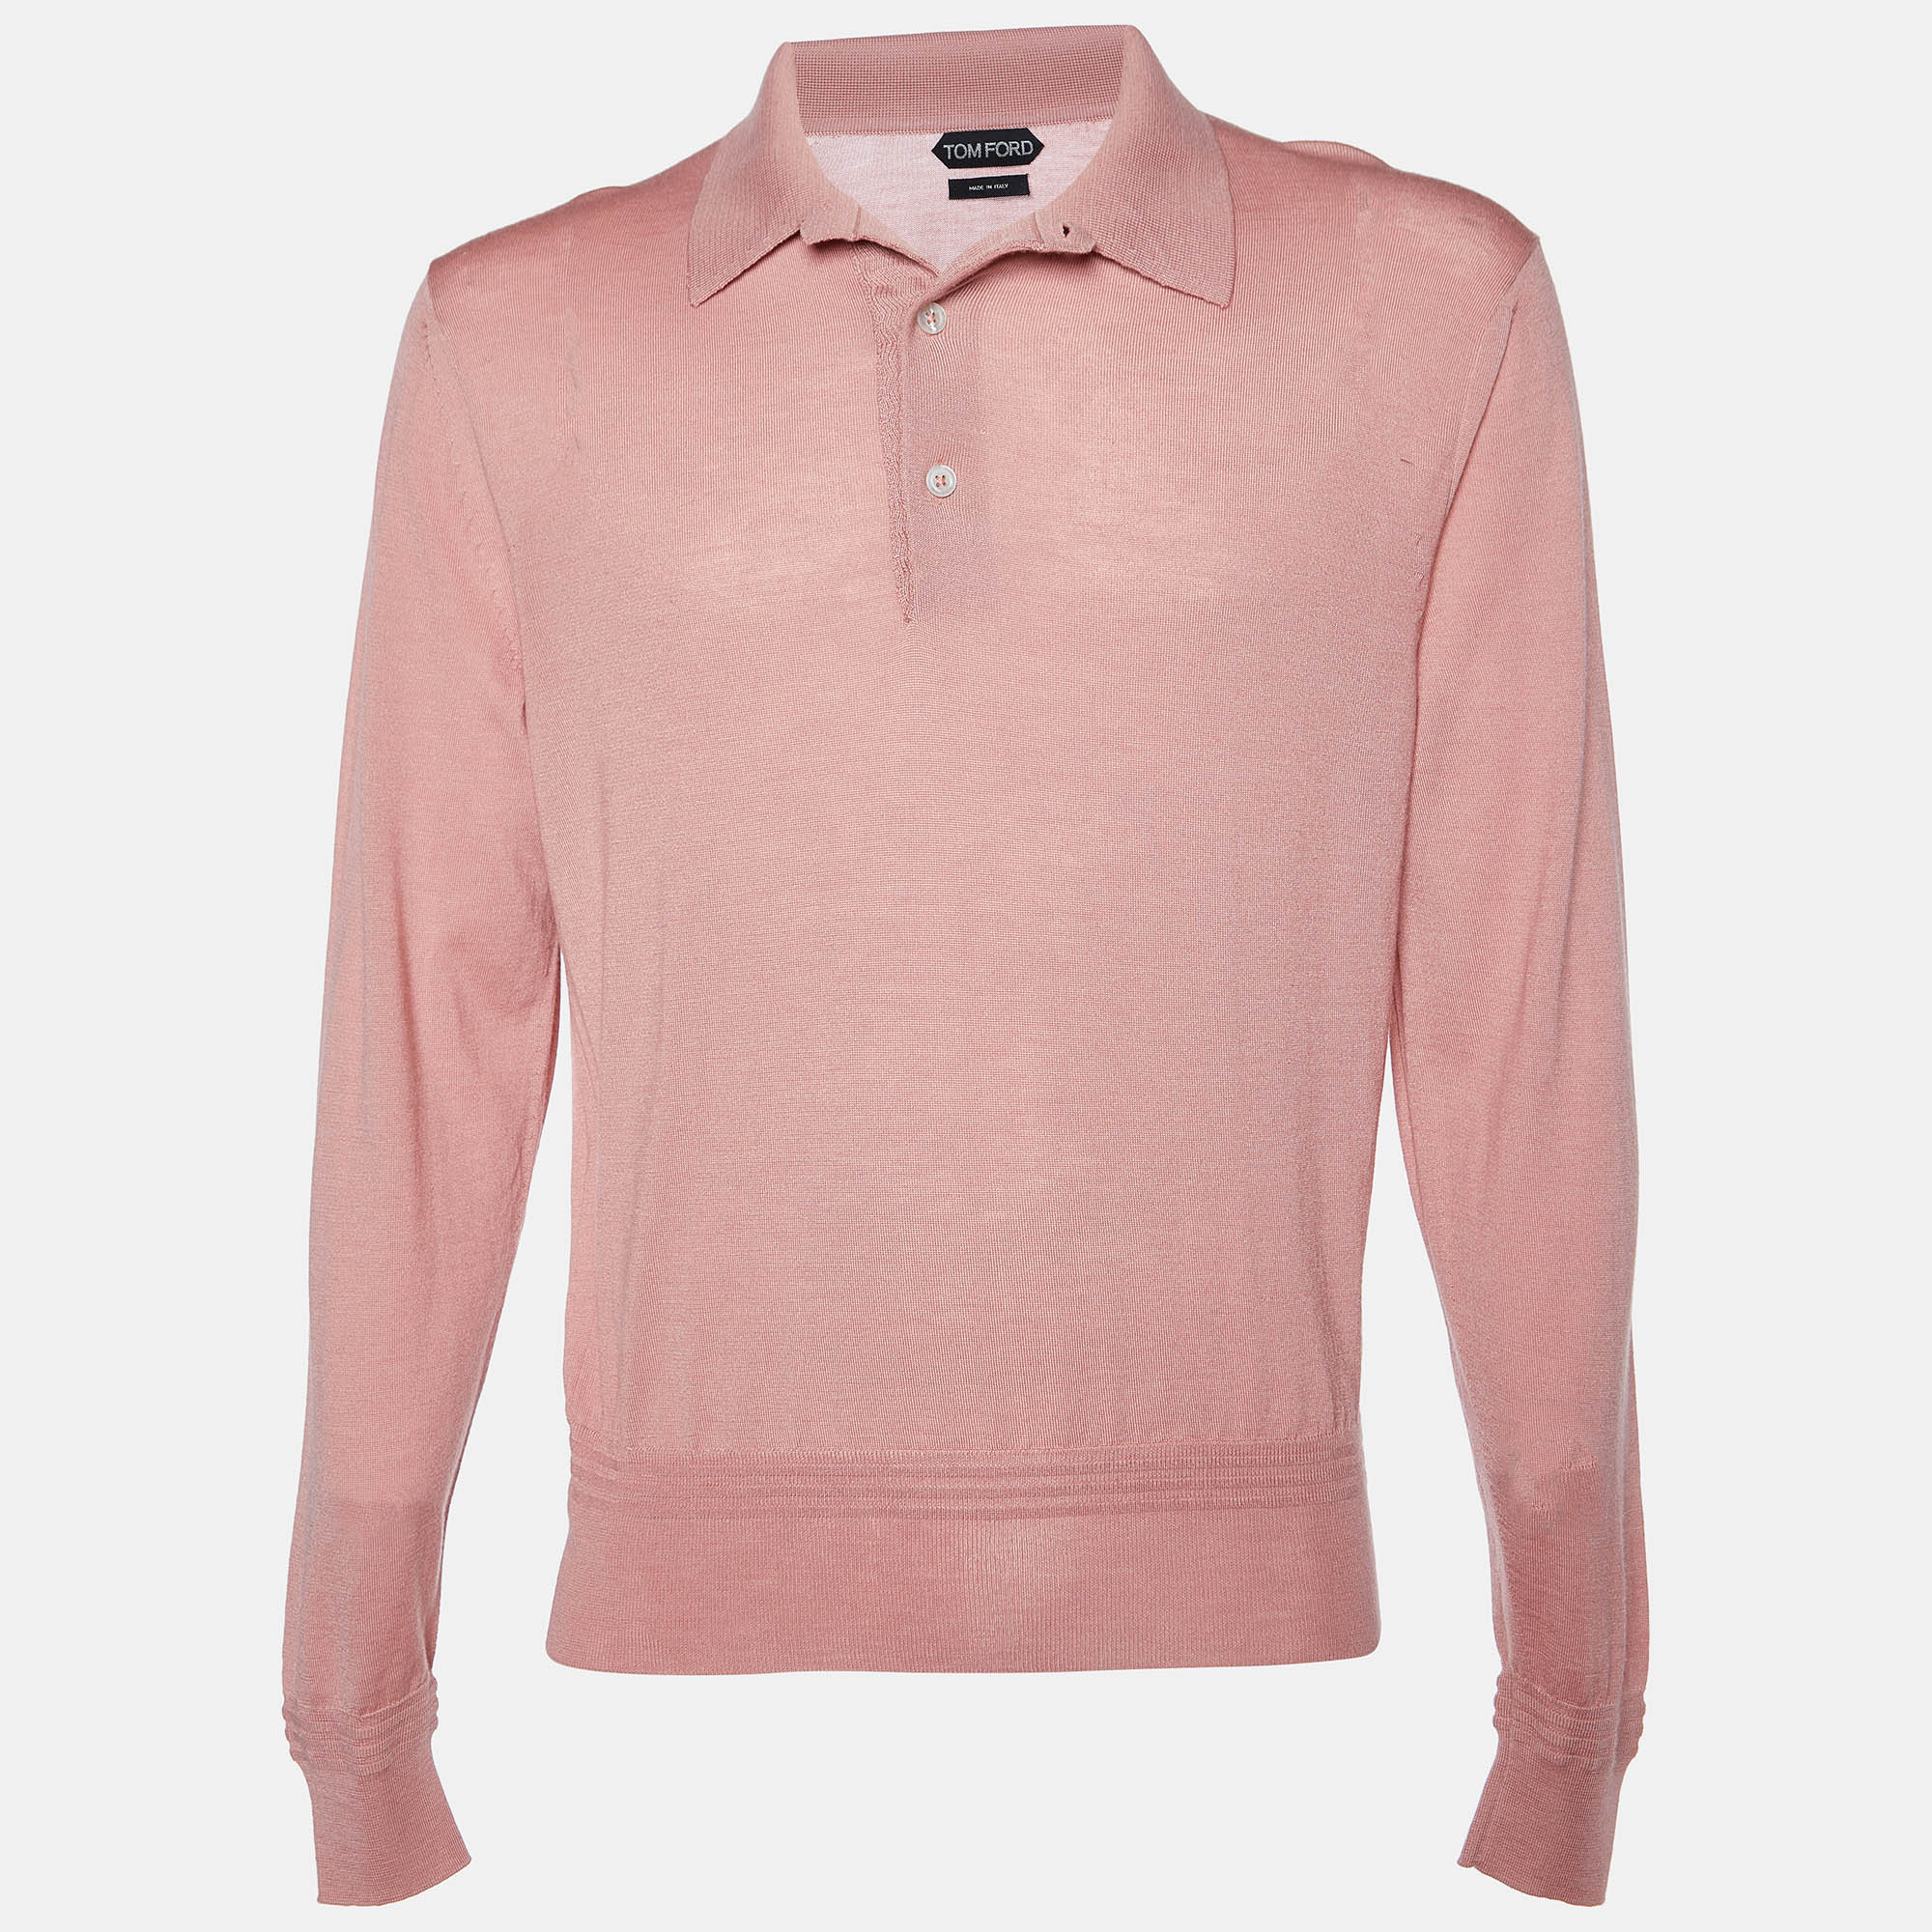 Tom ford light pink cashmere and silk polo long sleeve t-shirt xl